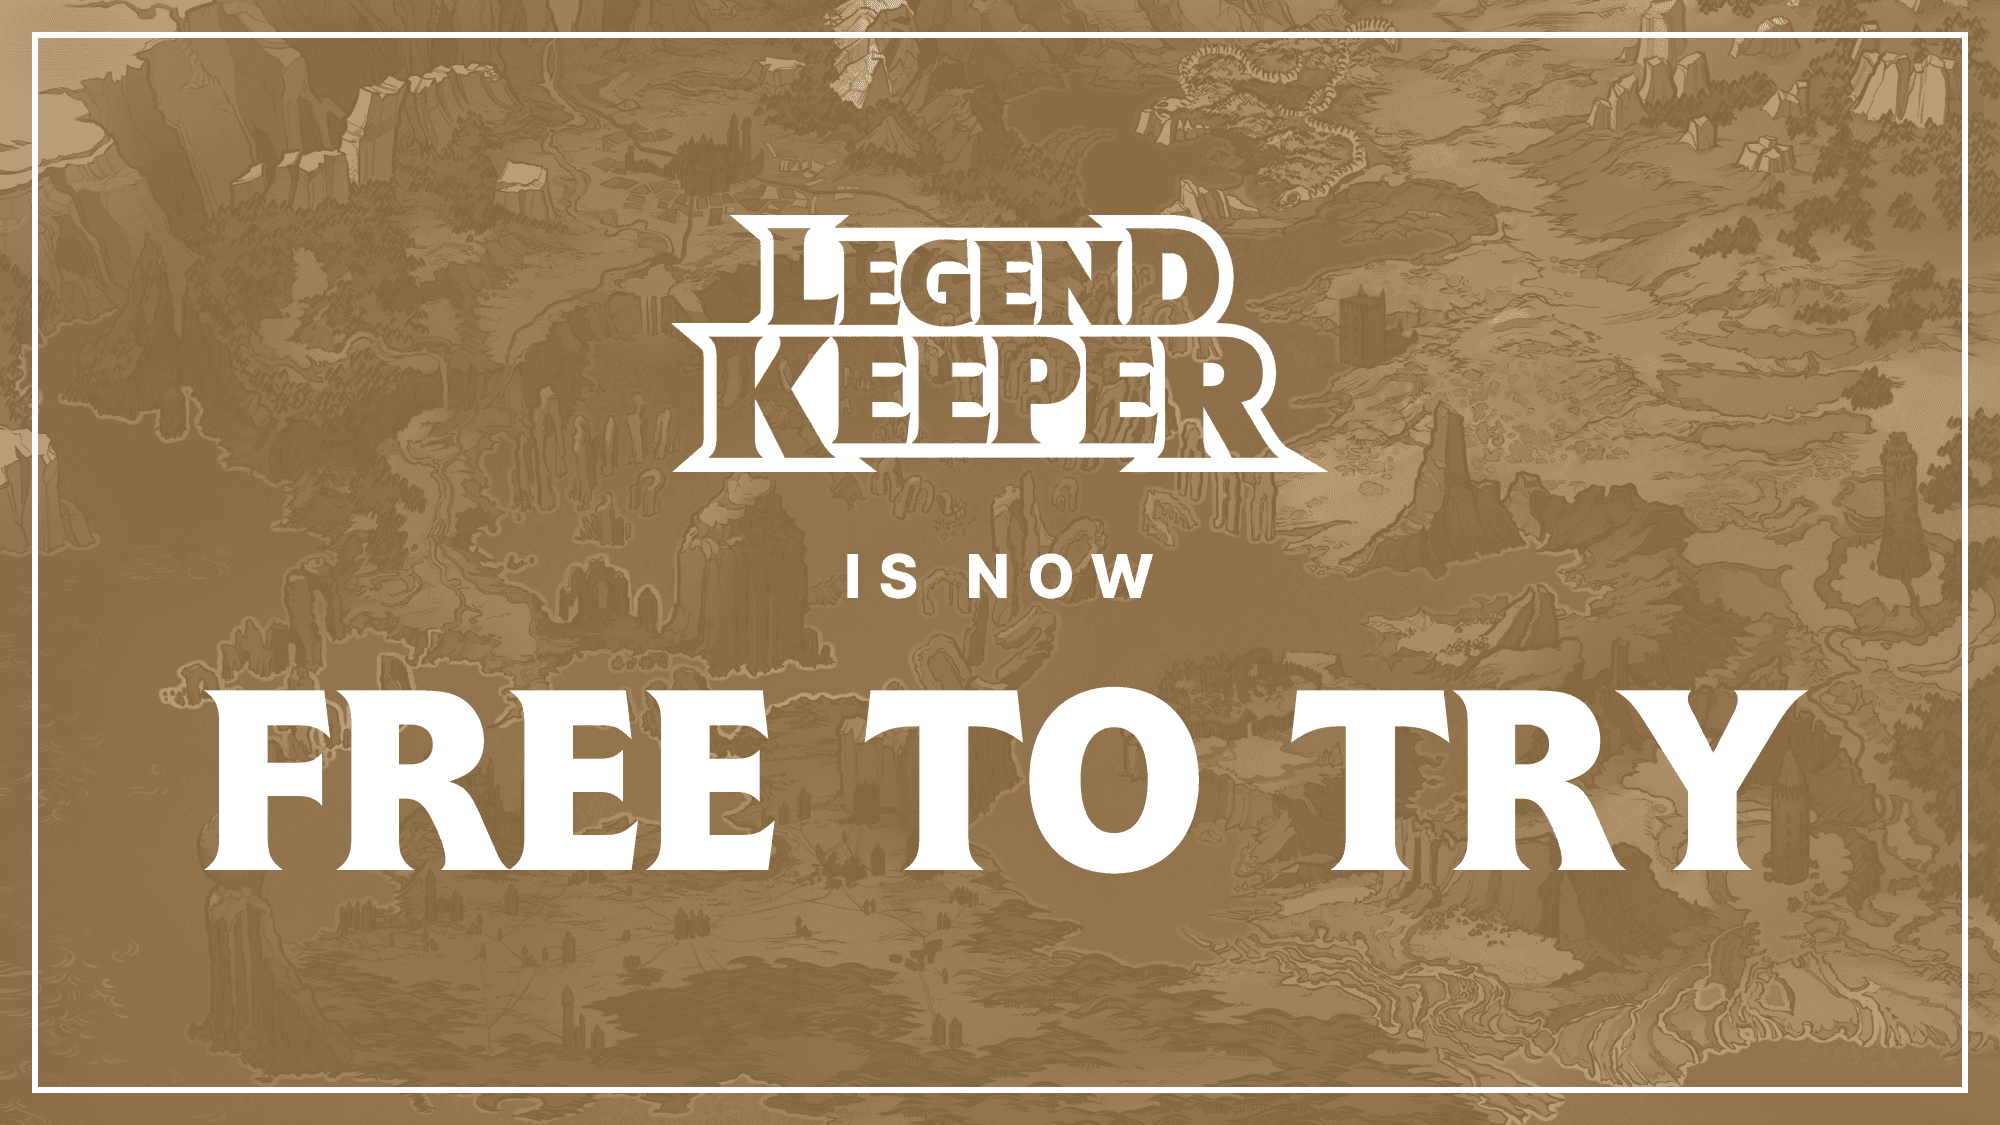 LegendKeeper is now free to try. Visit app.legendkeeper.com/signup